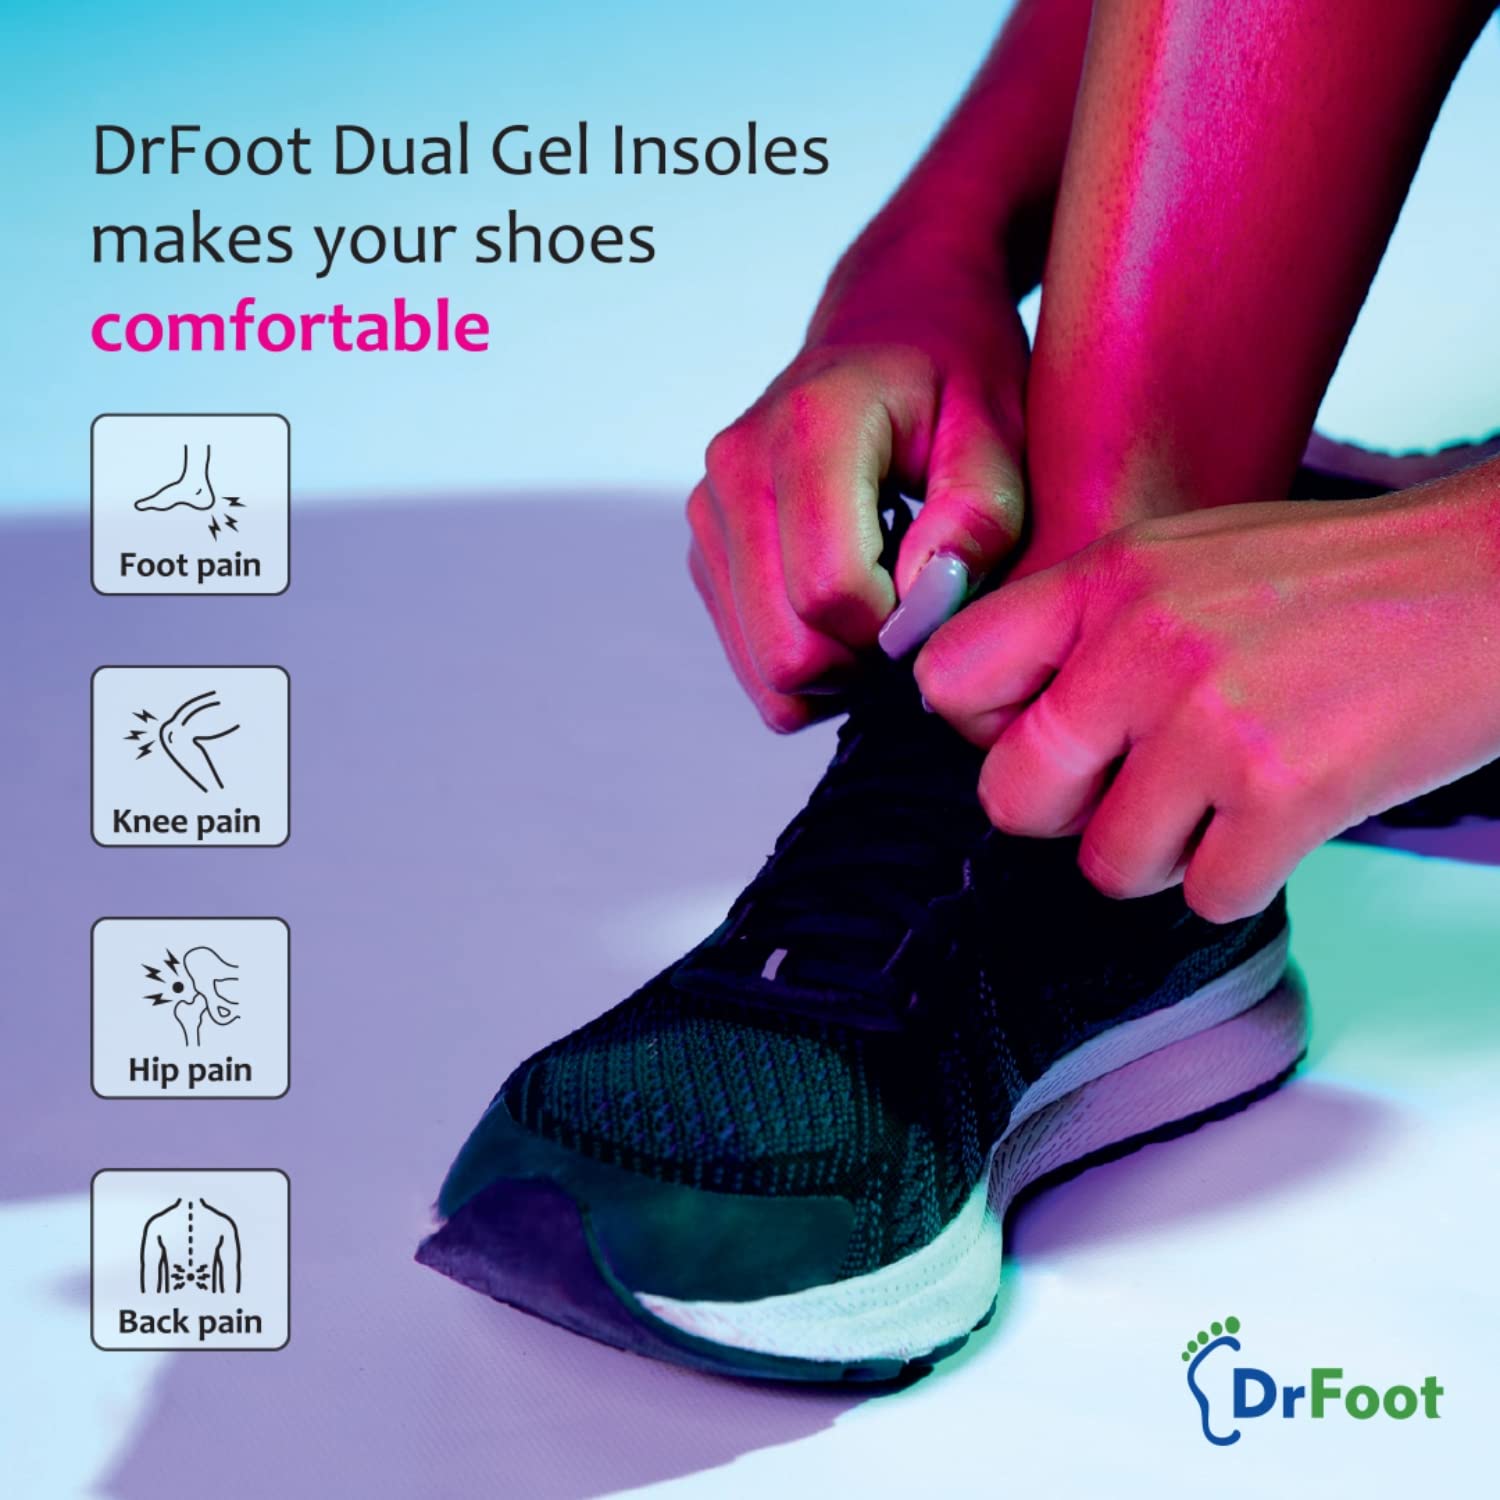 Dr Foot Dual Gel Insoles Anti-Microbial | For Walking, Running, Hiking & Regular Use | All Day Ultra Comfrort & Support & Shock Absorption With Dual Gel Technology | For Women – 1 Pair (Pack of 2)